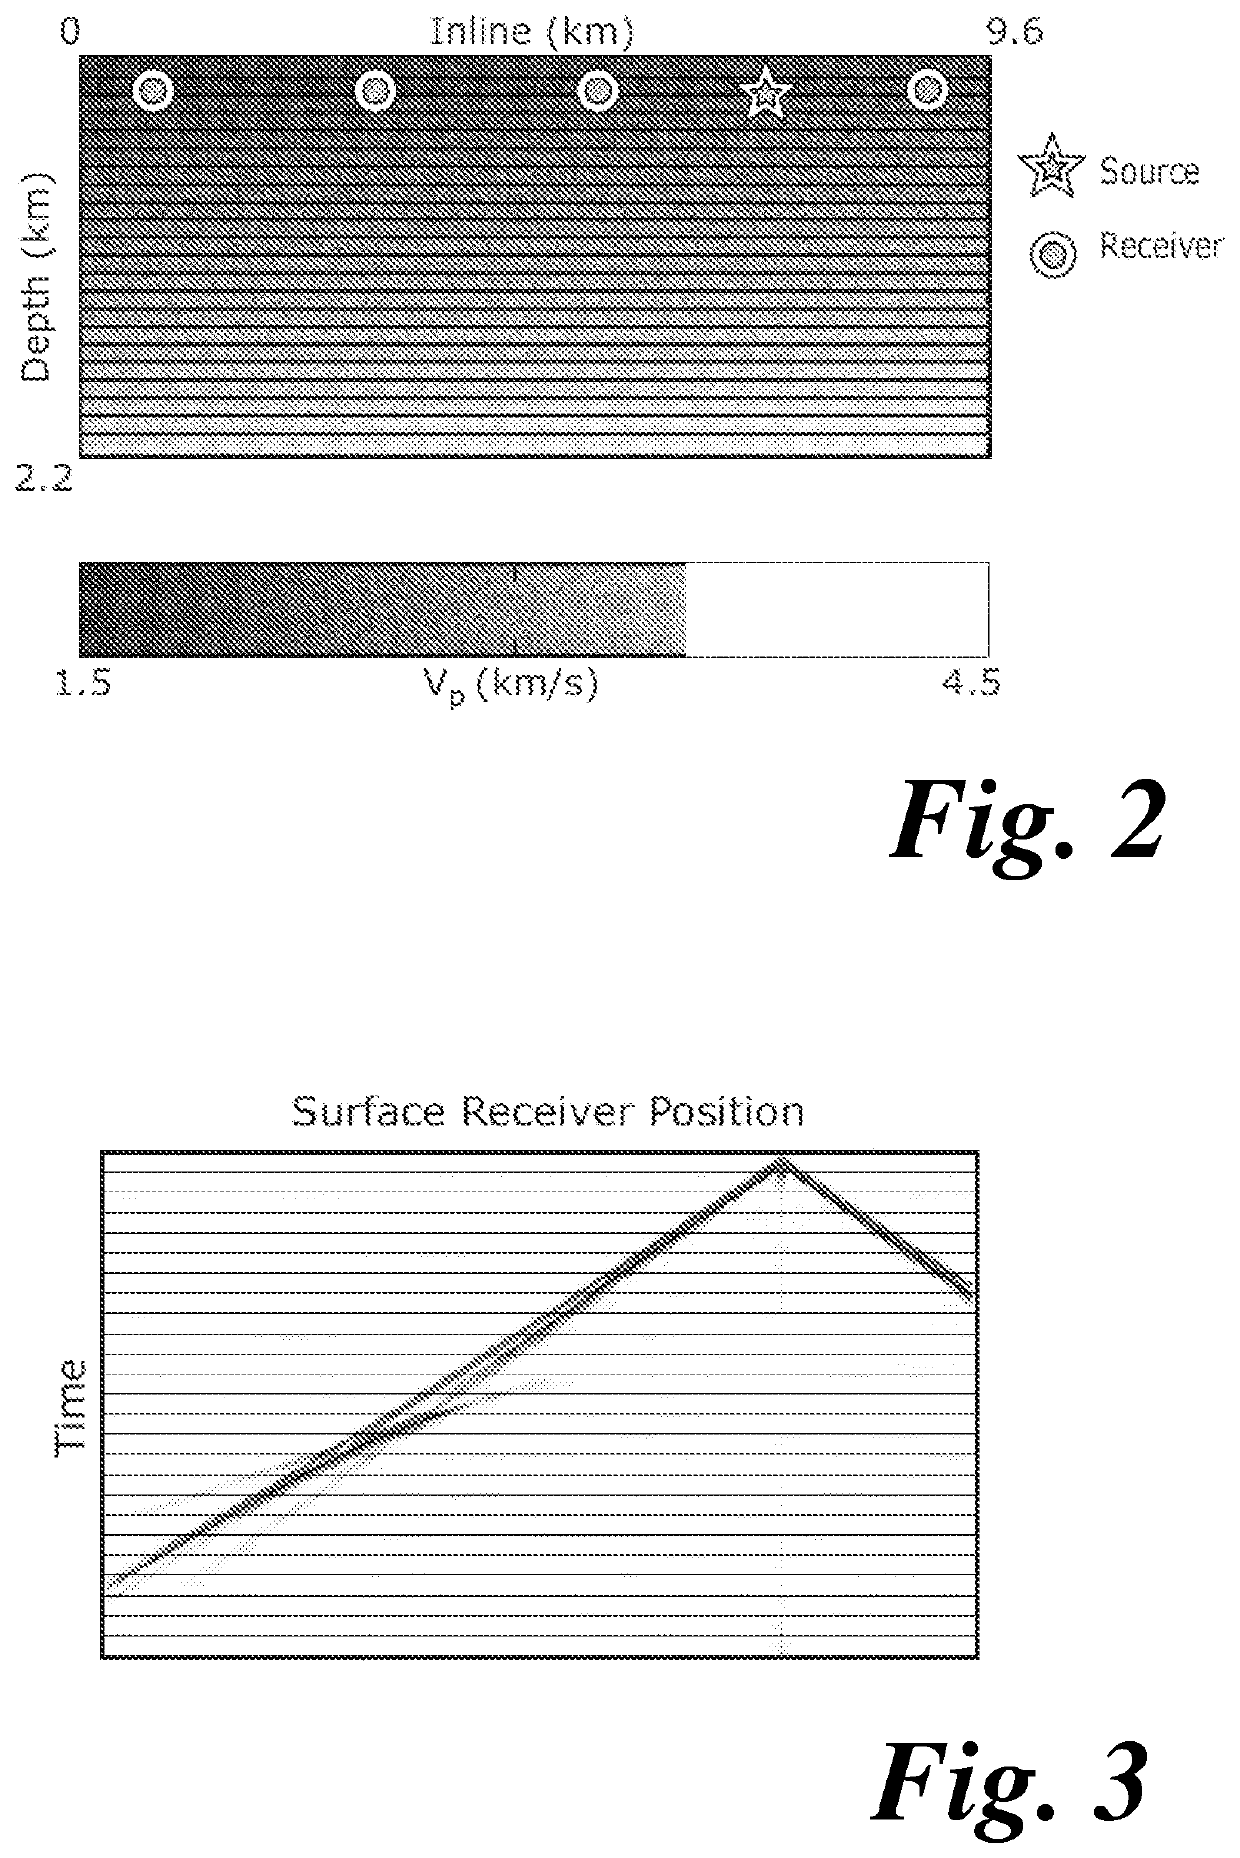 Method of, and apparatus for, full waveform inversion